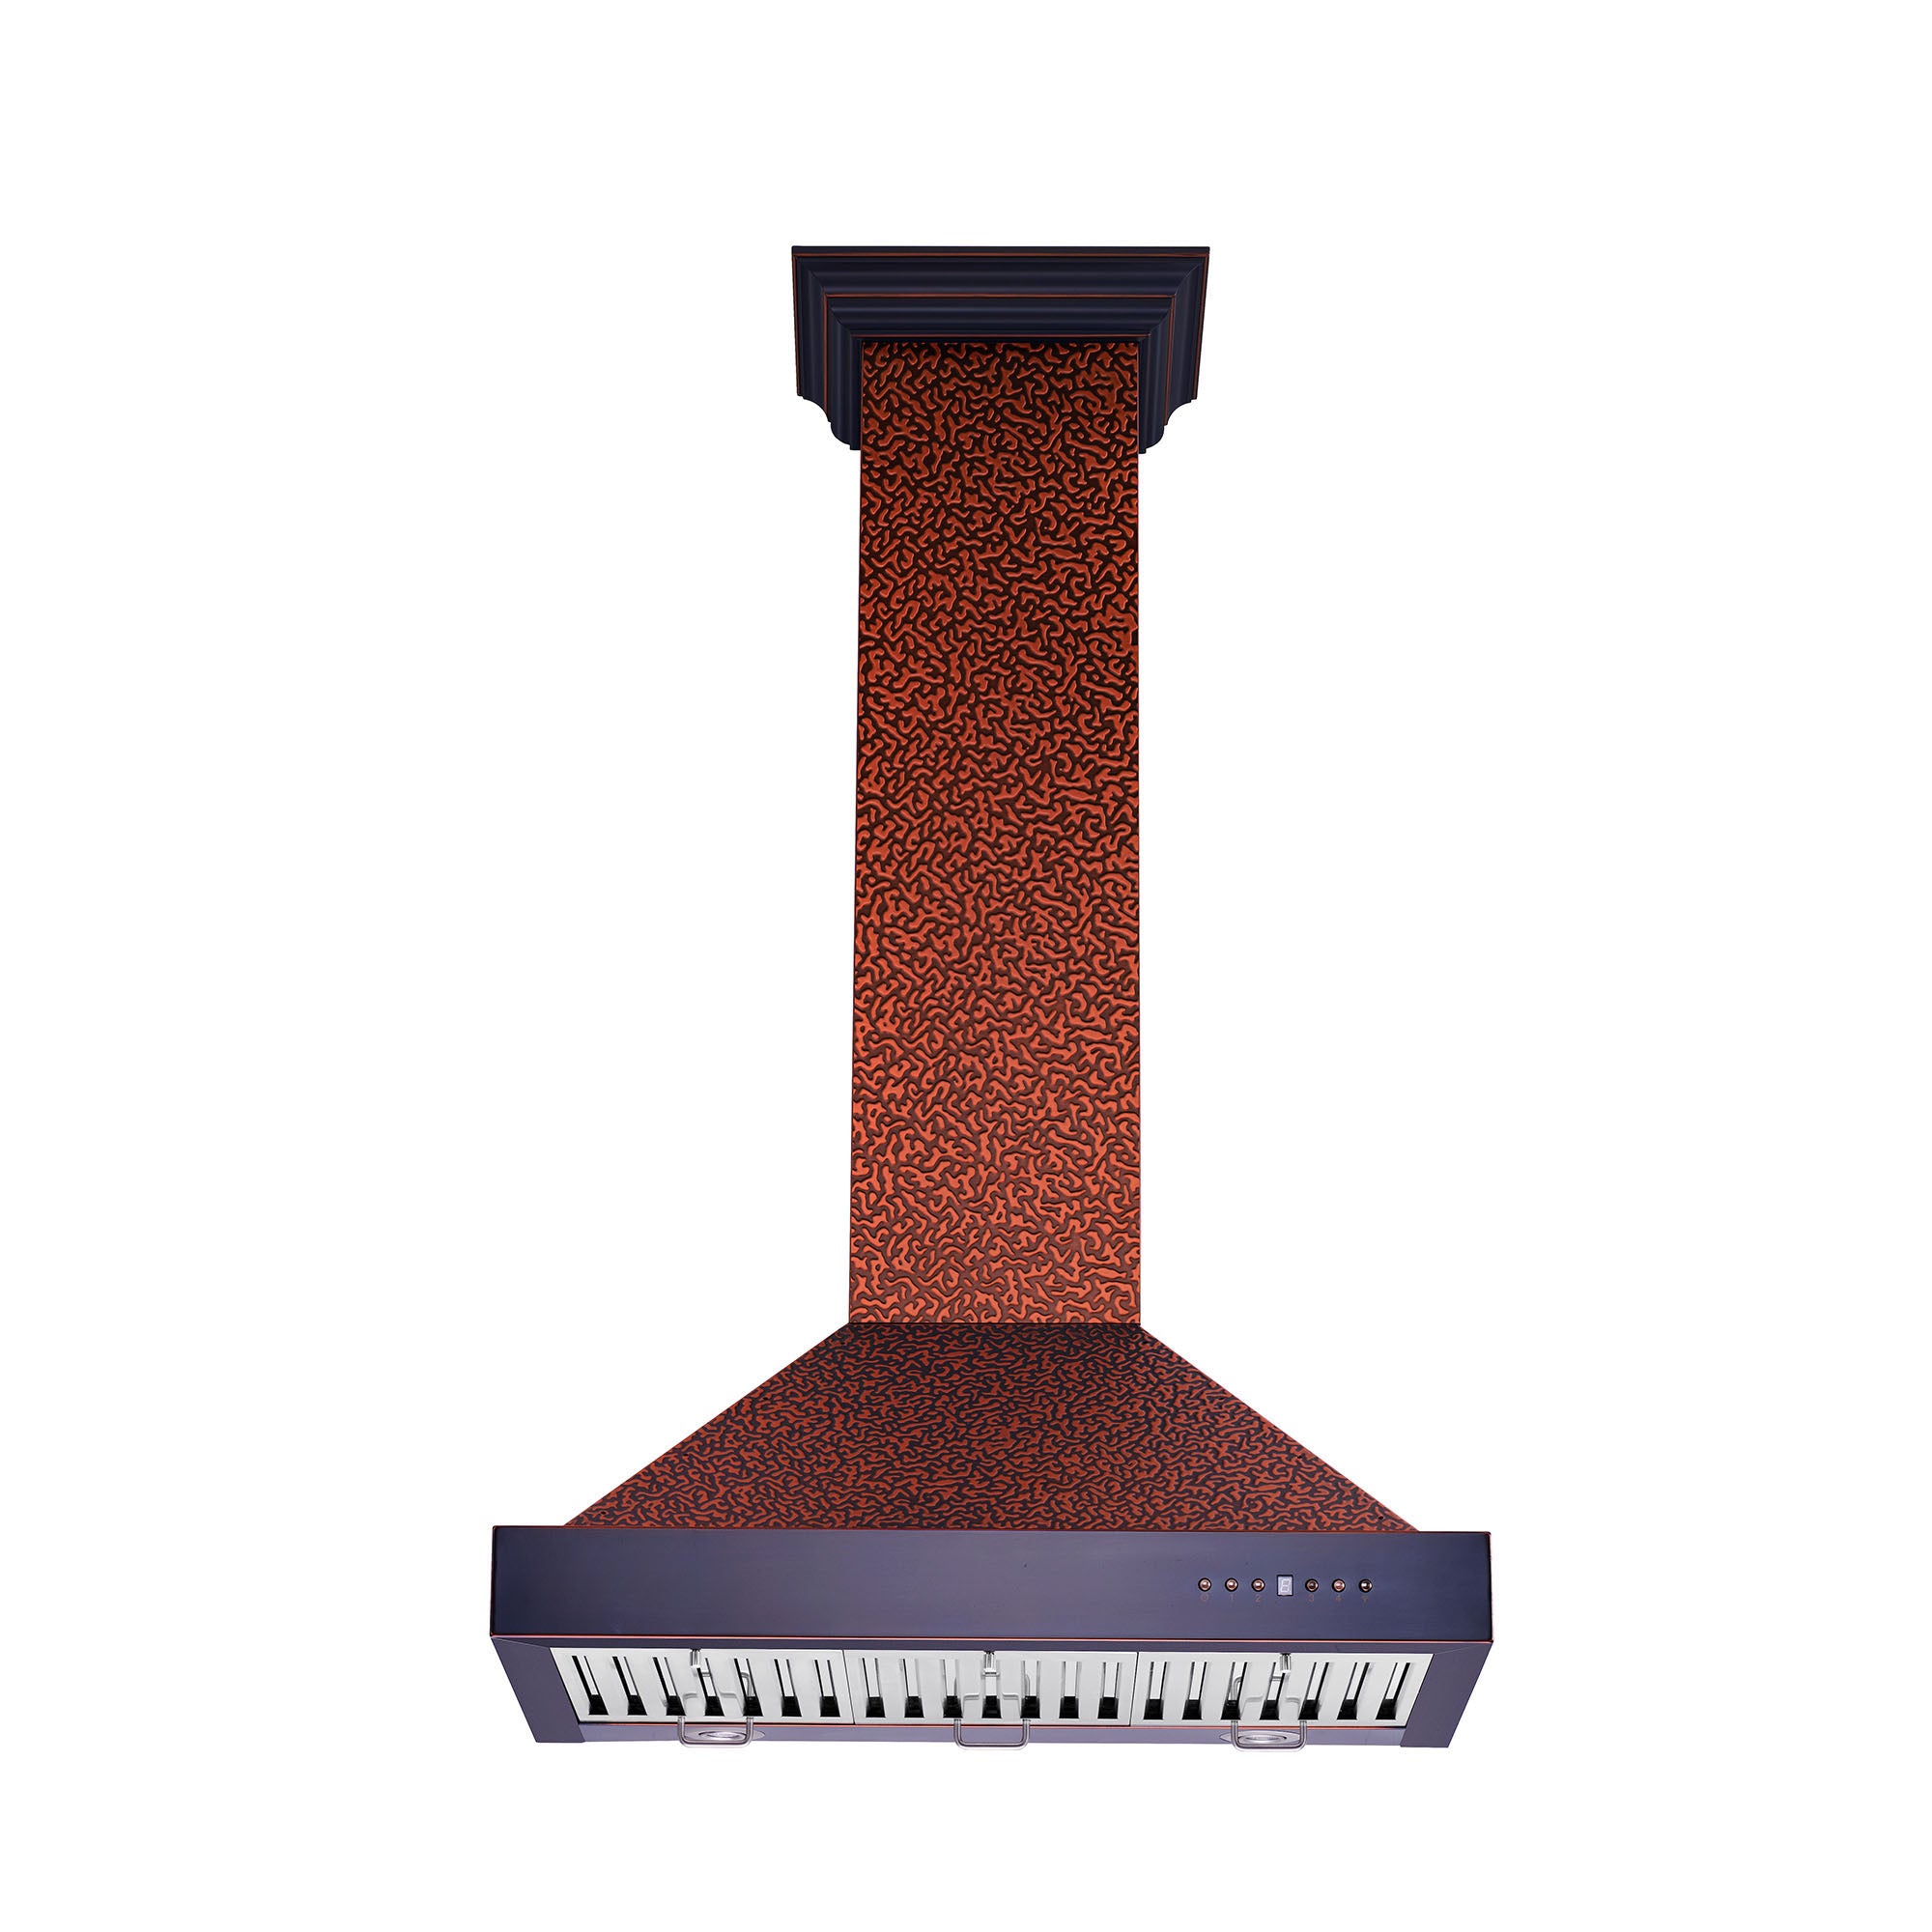 ZLINE Designer Series Wall Mount Range Hood in Embossed Copper with Size Options (KB2-EBXXX) 48 inch front, under.